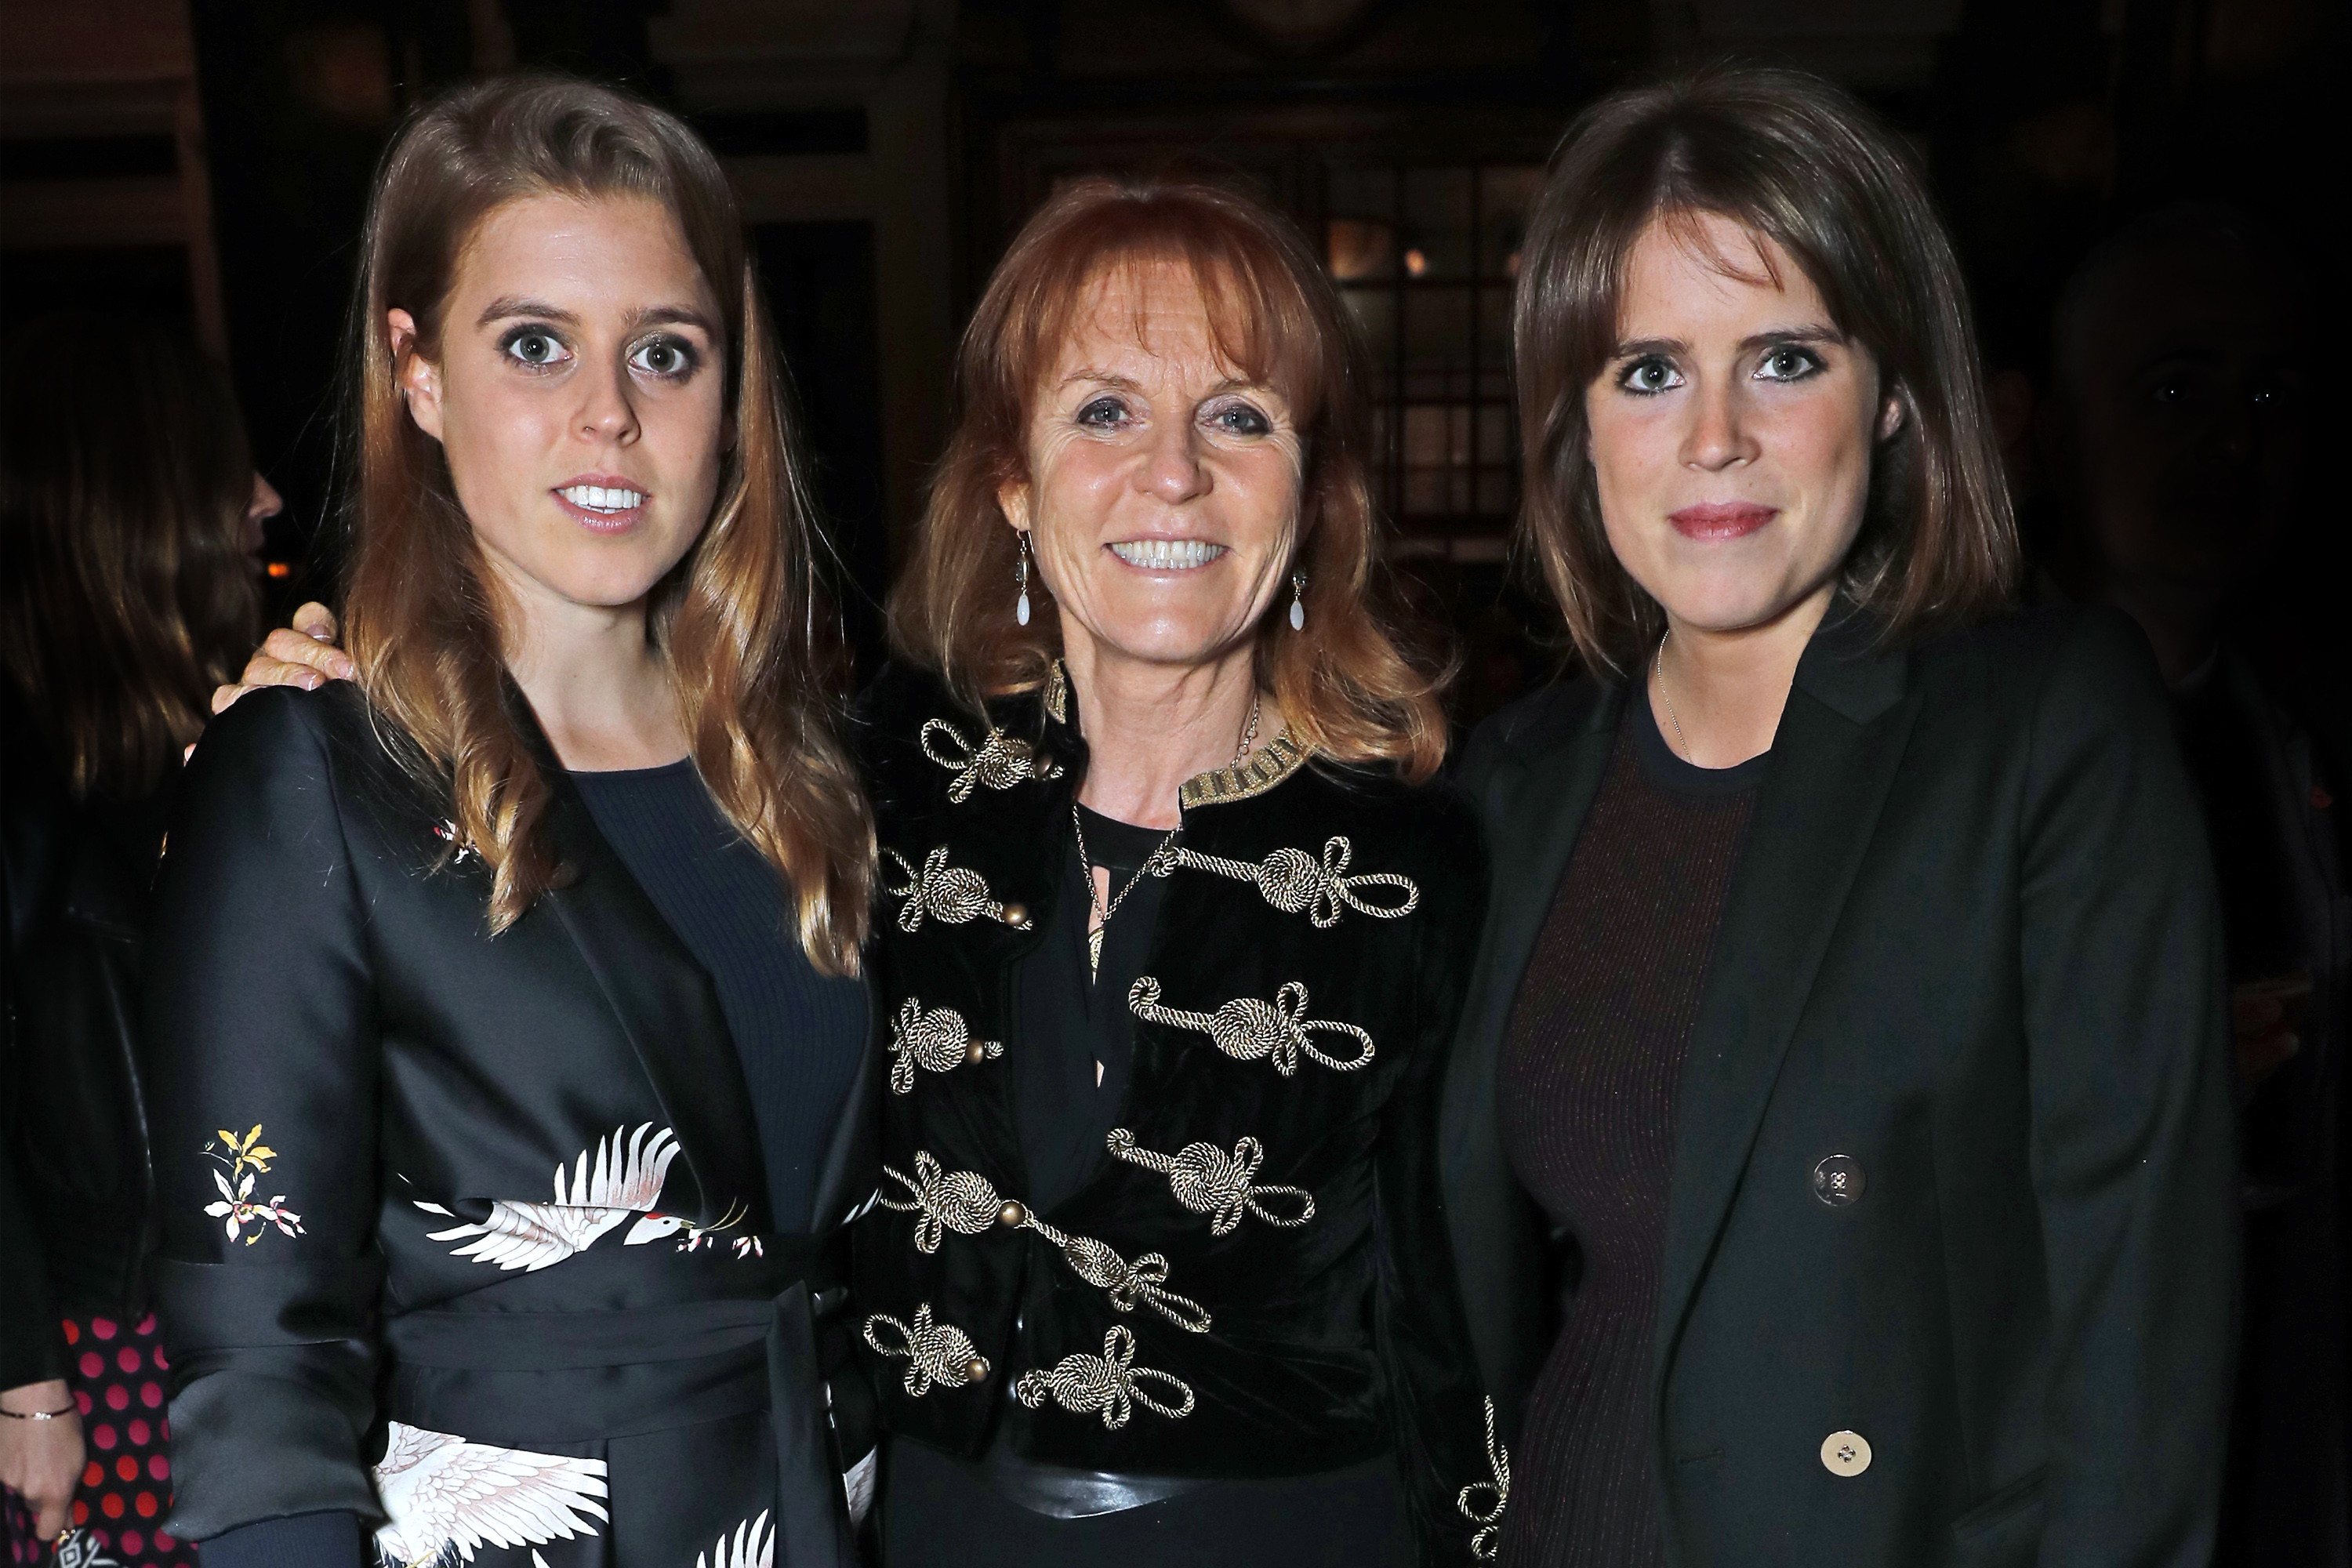 Princess Beatrice, Sarah Ferguson, and Princess Eugenie pose for a photo at an event in London